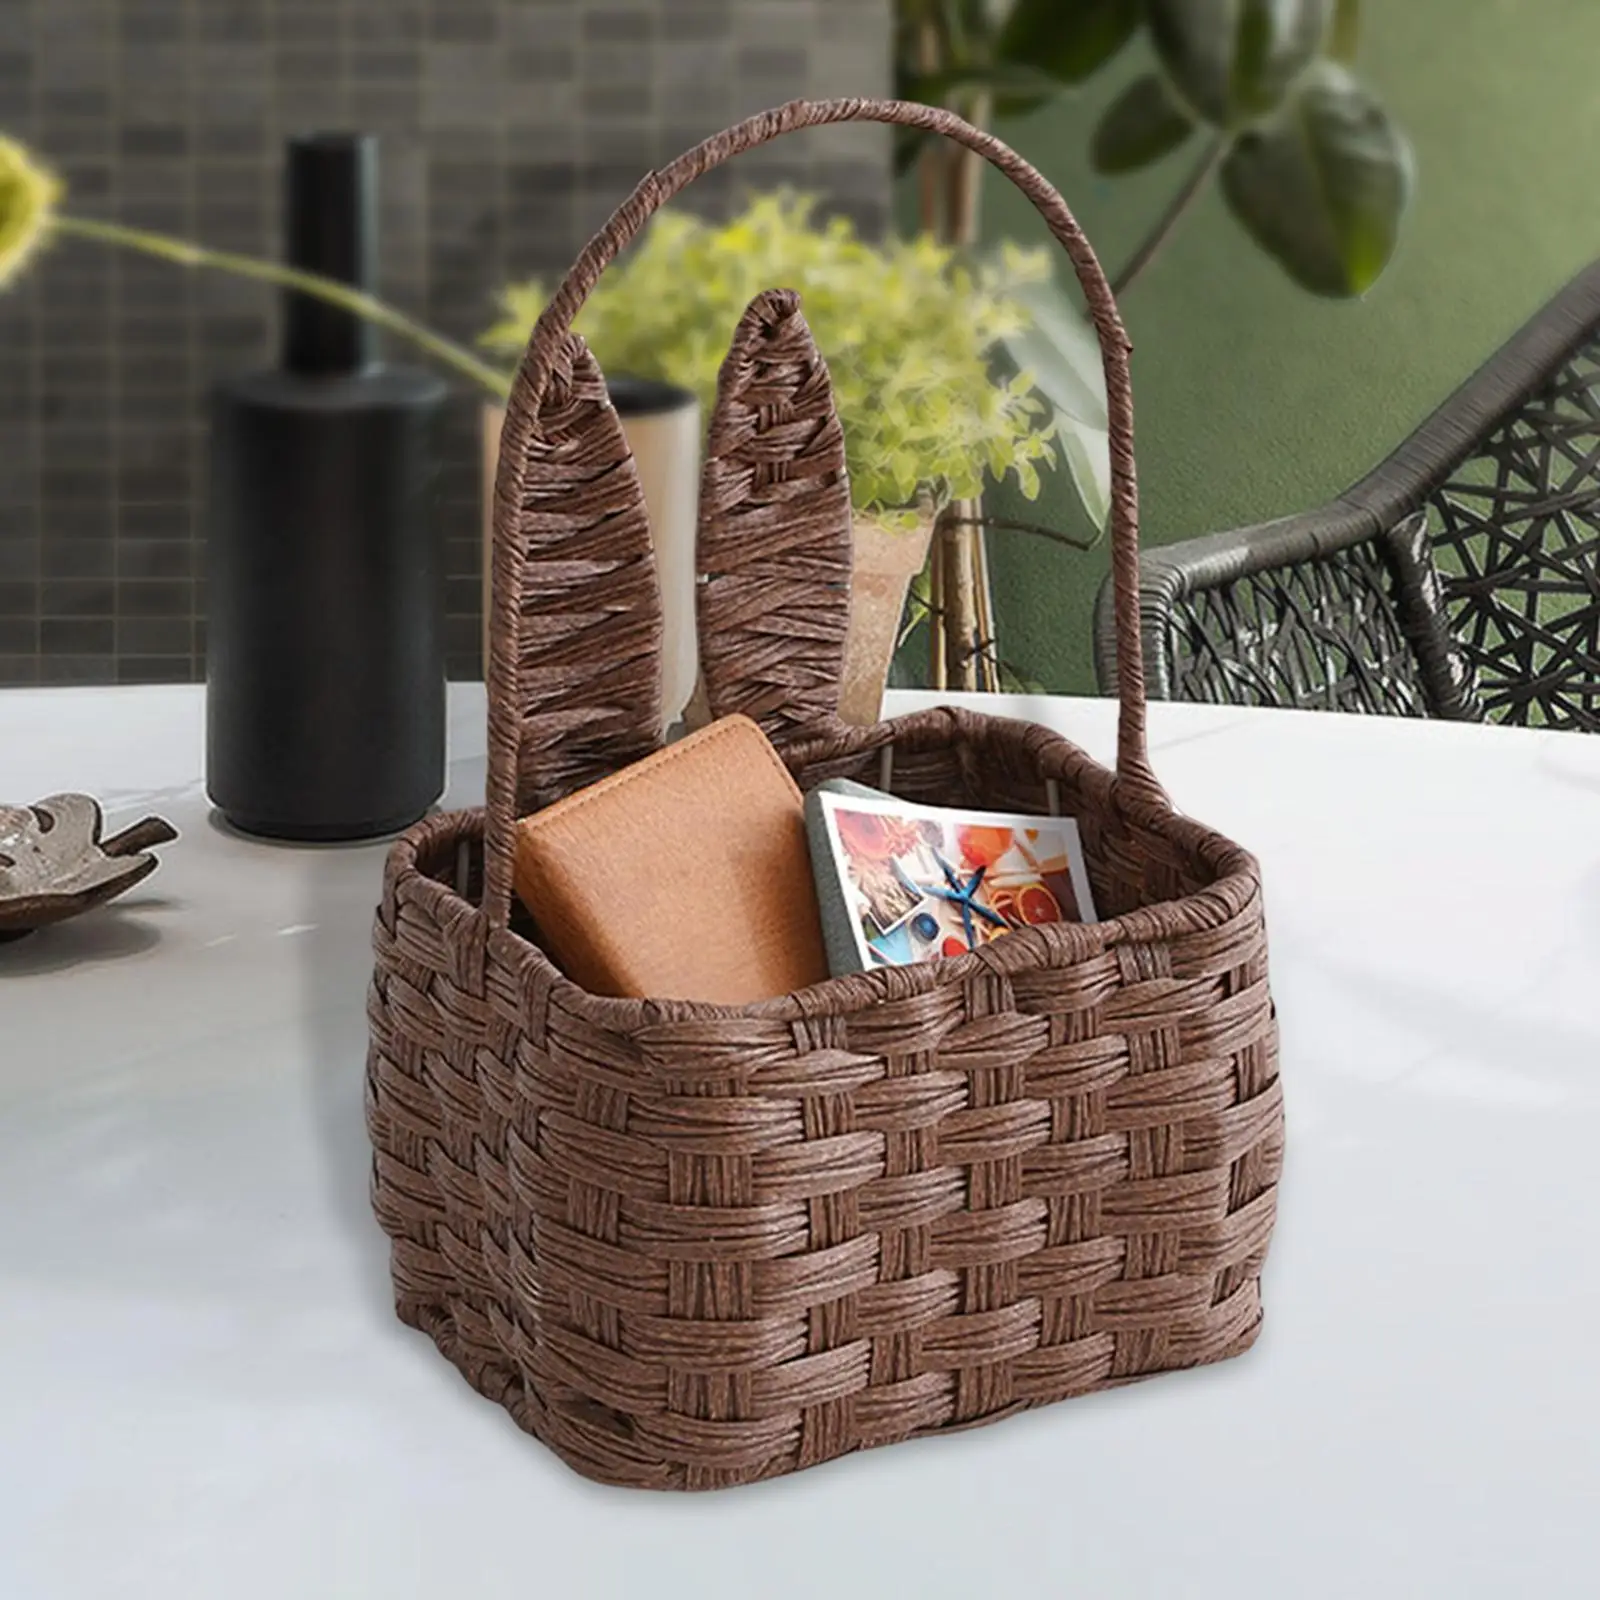 Portable Rabbit Ears Picnic Basket Handmade Best Gift Makeup Organizer with Handle Wicker Box for Camping Family Home Decoration